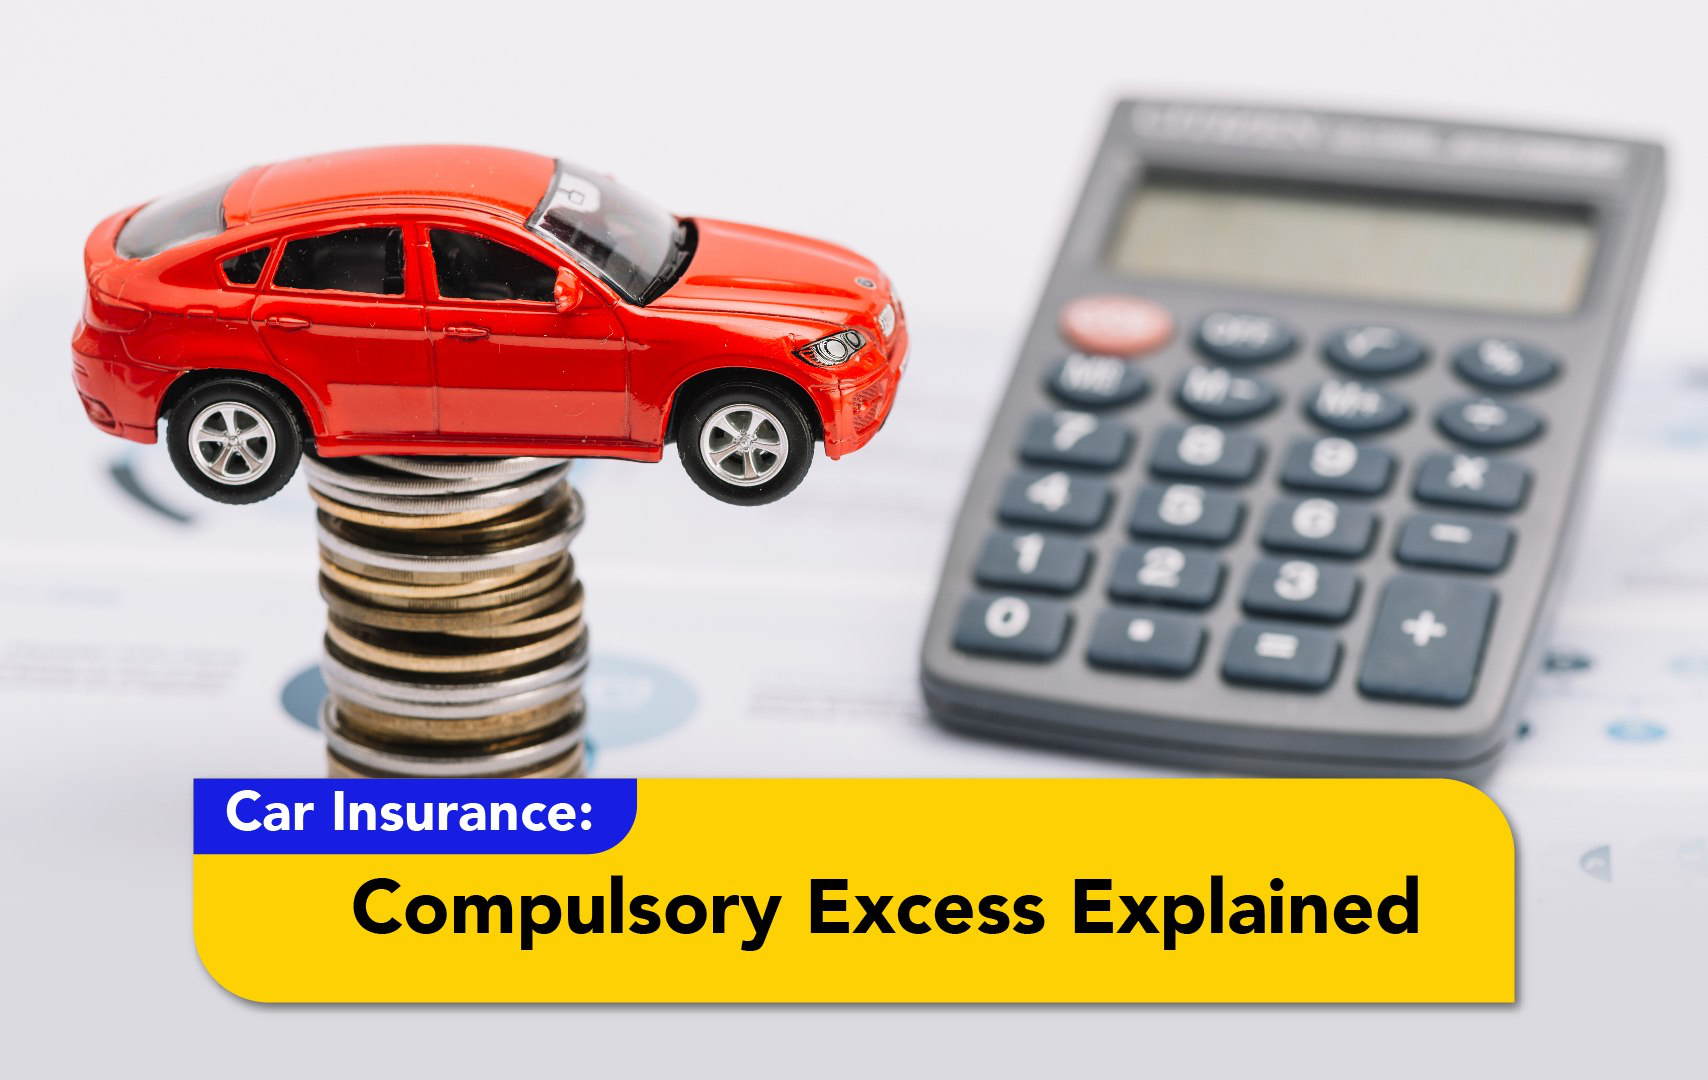 What Does Excess Mean in Car Insurance and Its Types